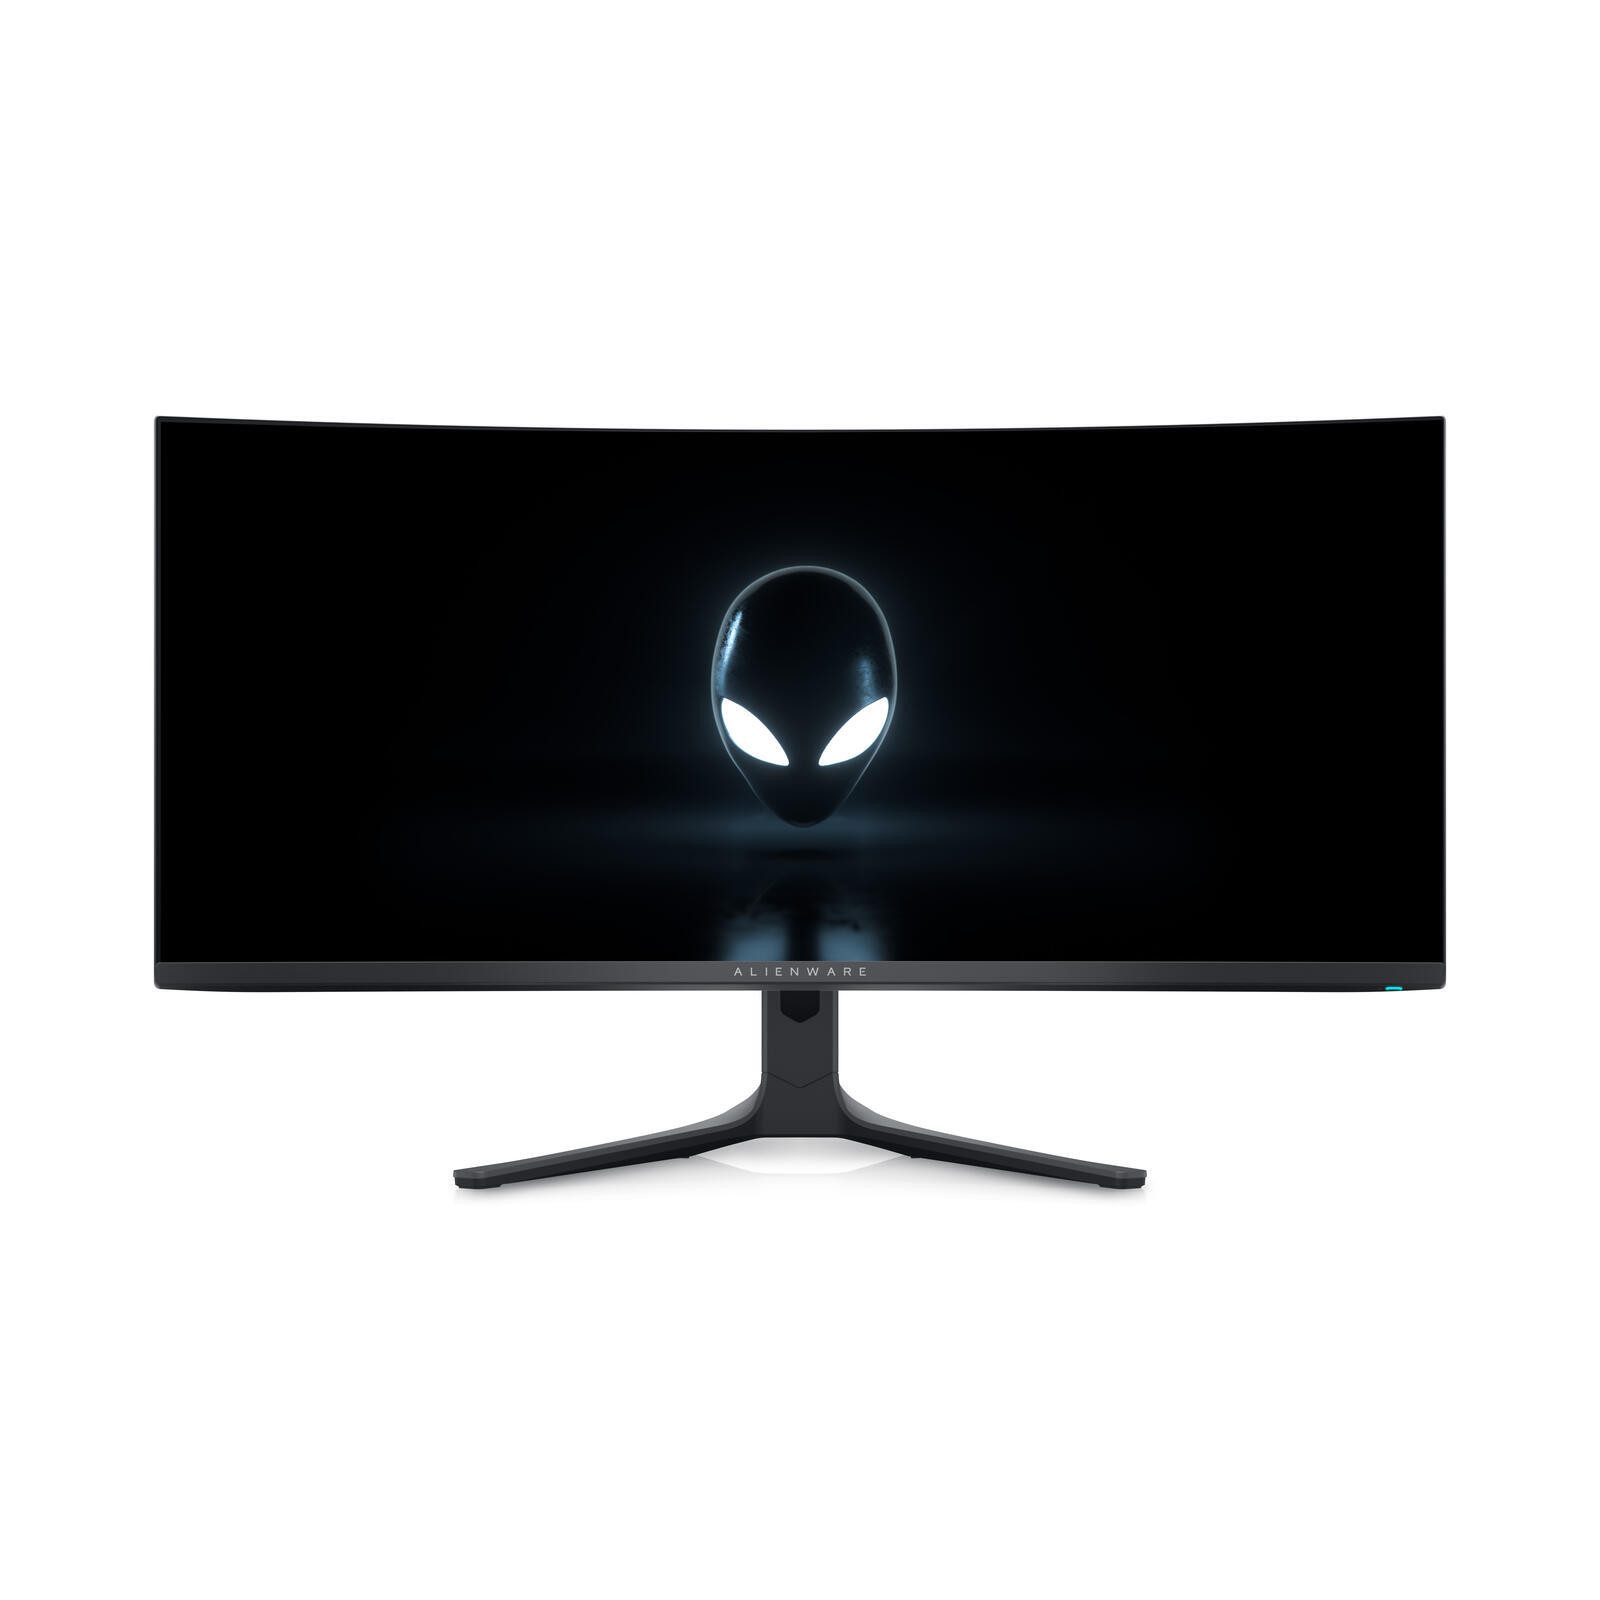 Dell Alienware AW3423DWF Gaming-LED-Monitor (3.440 x 1.440 Pixel (21:9), 1 ms Reaktionszeit, 165 Hz, OLED)